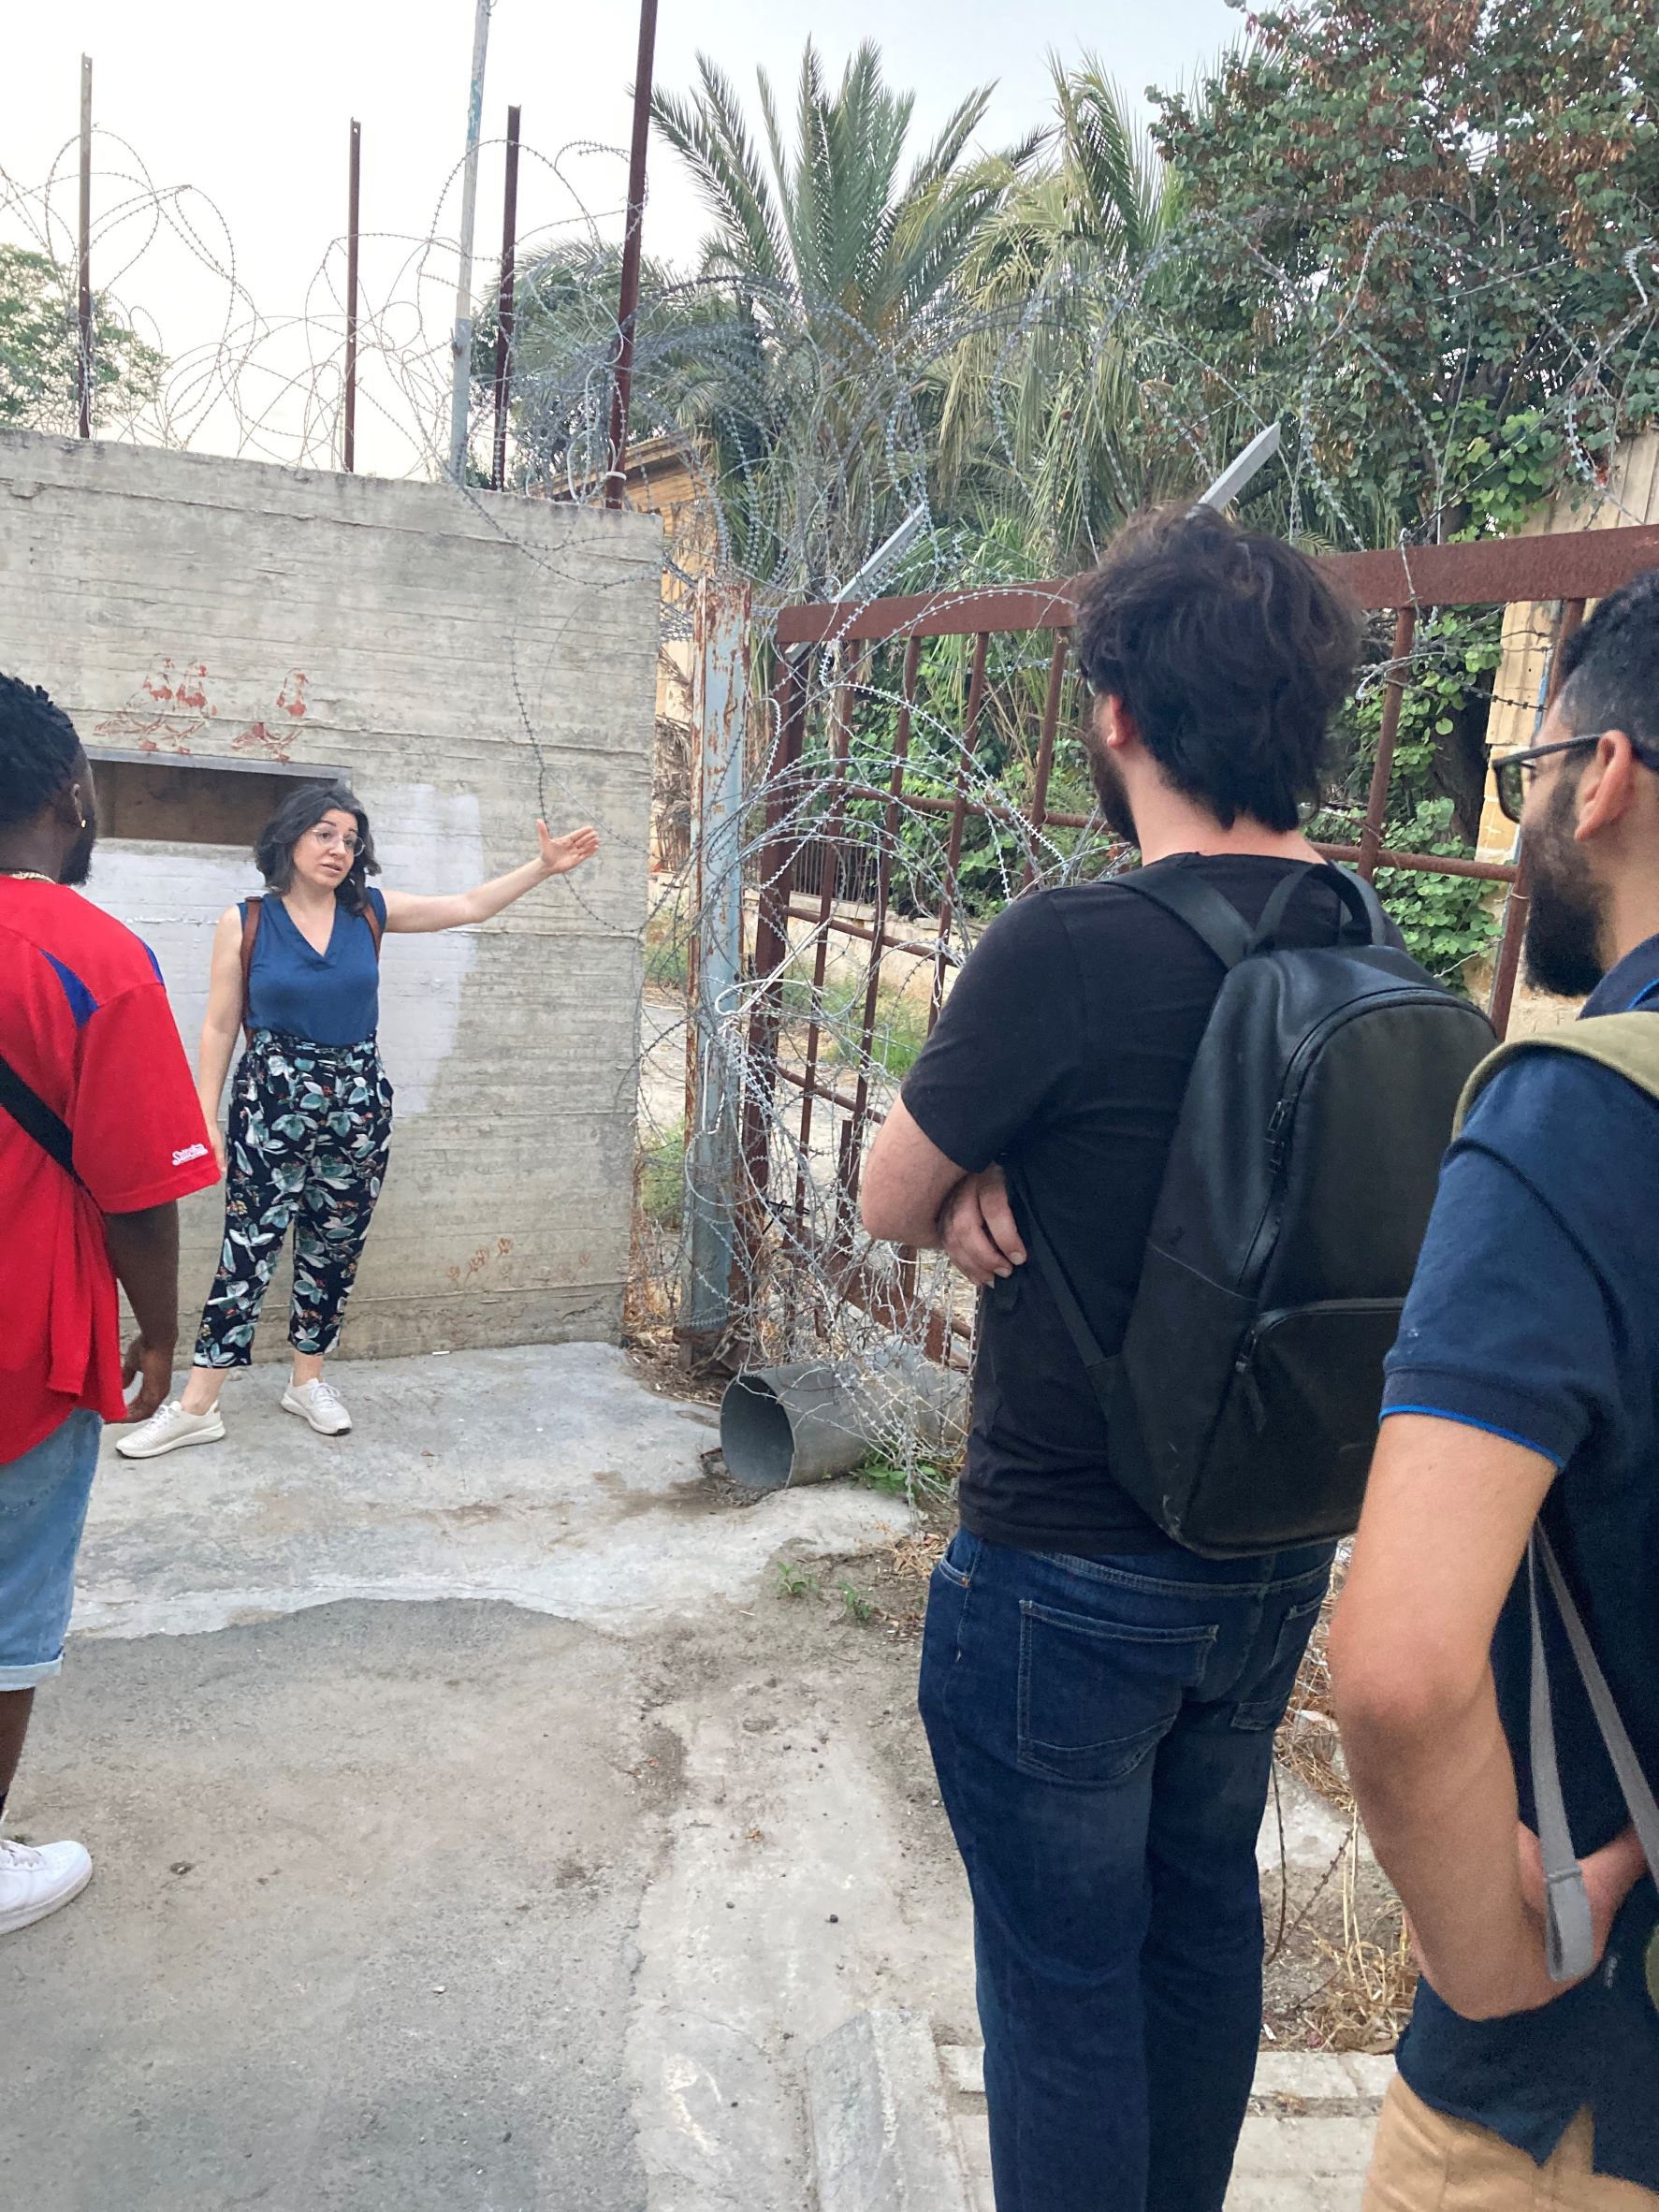 Dr. Nicoletta Demetriu, who visited Stockton as a Fulbright Scholar in 2017, leads the group through Nicosia's Old Town.